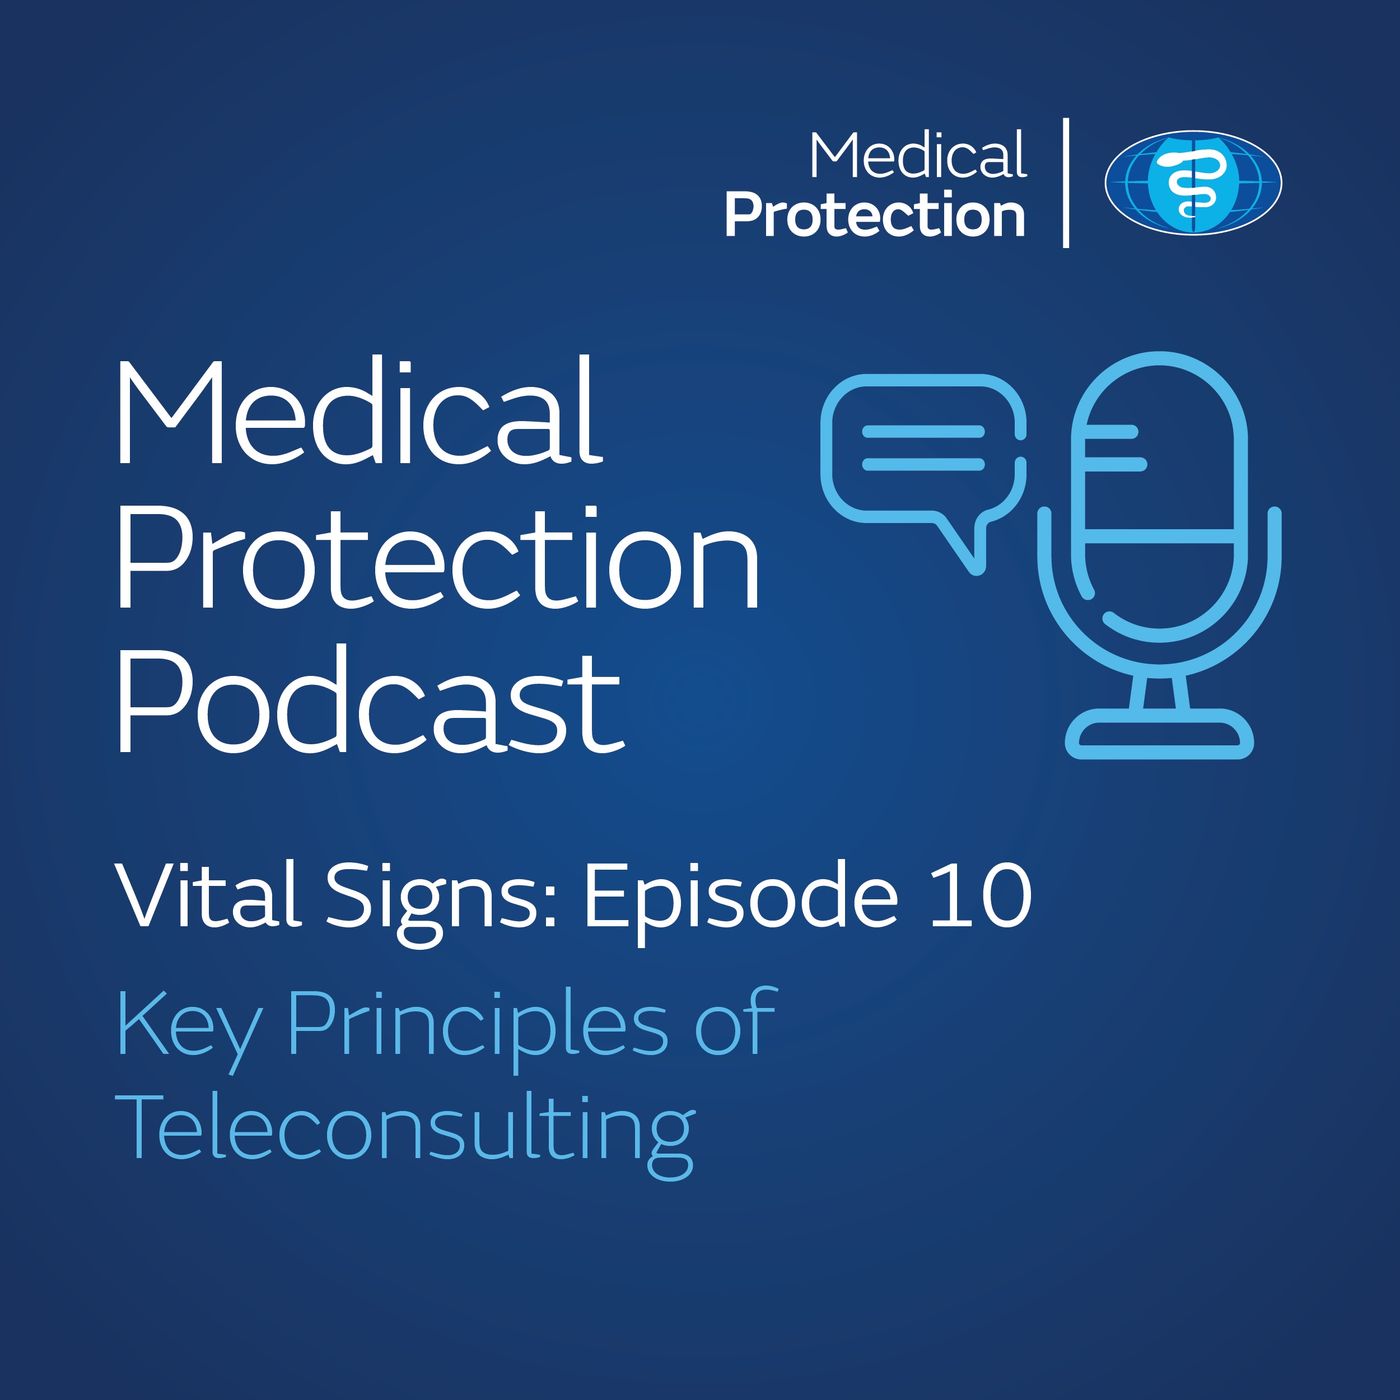 Vital signs episode 10: Key Principles of Teleconsulting